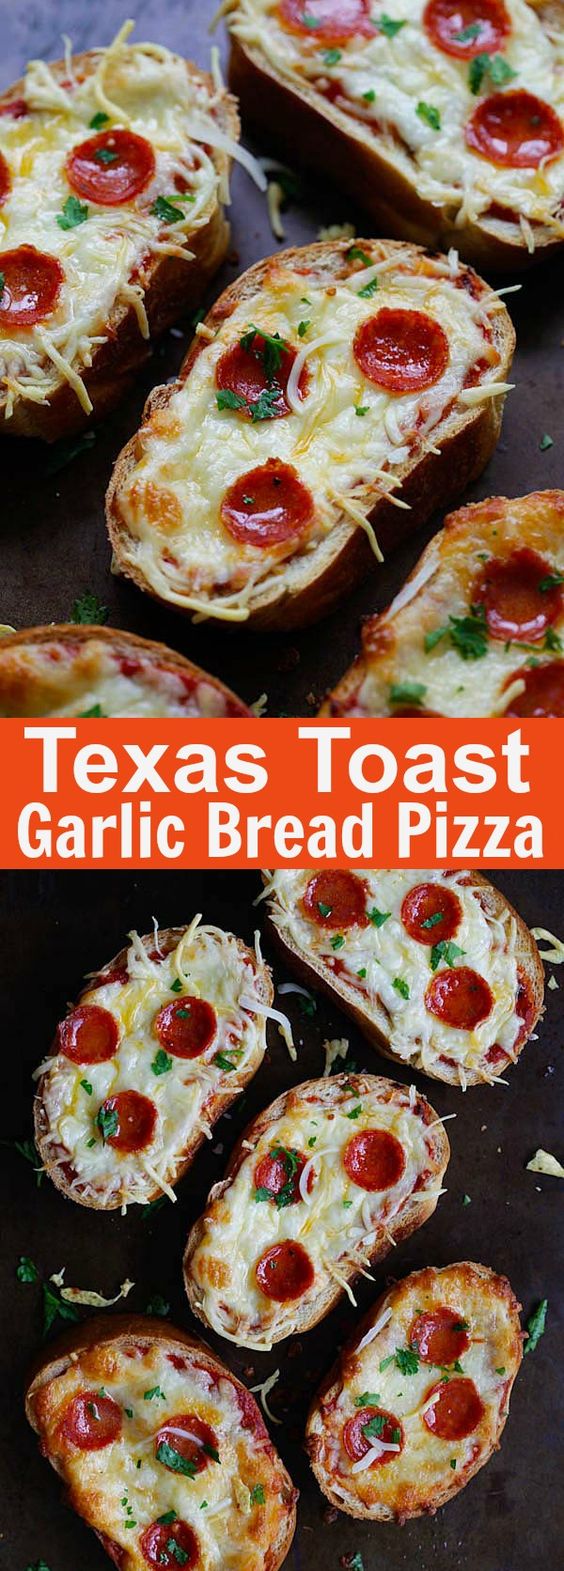 Texas Toast Garlic Bread Pizza – loaded with pizza sauce, mozzarella cheese and pepperoni, these addictive garlic bread pizza is a party favorite | rasamalaysia.com